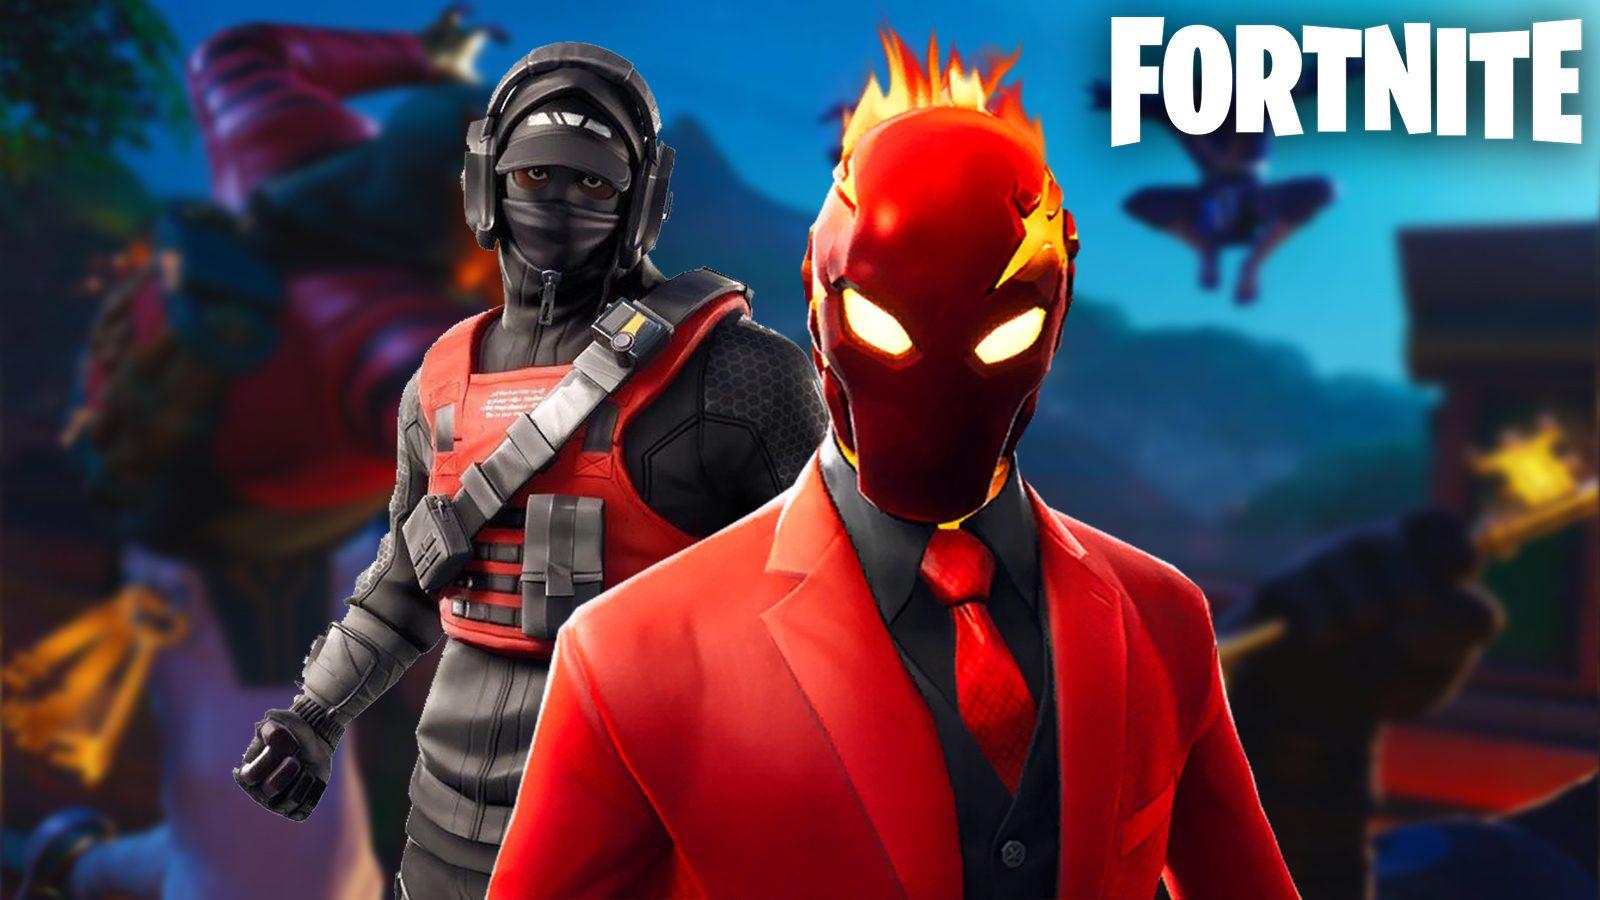 Fortnite: Leaked skins and cosmetics from v8.30 patch